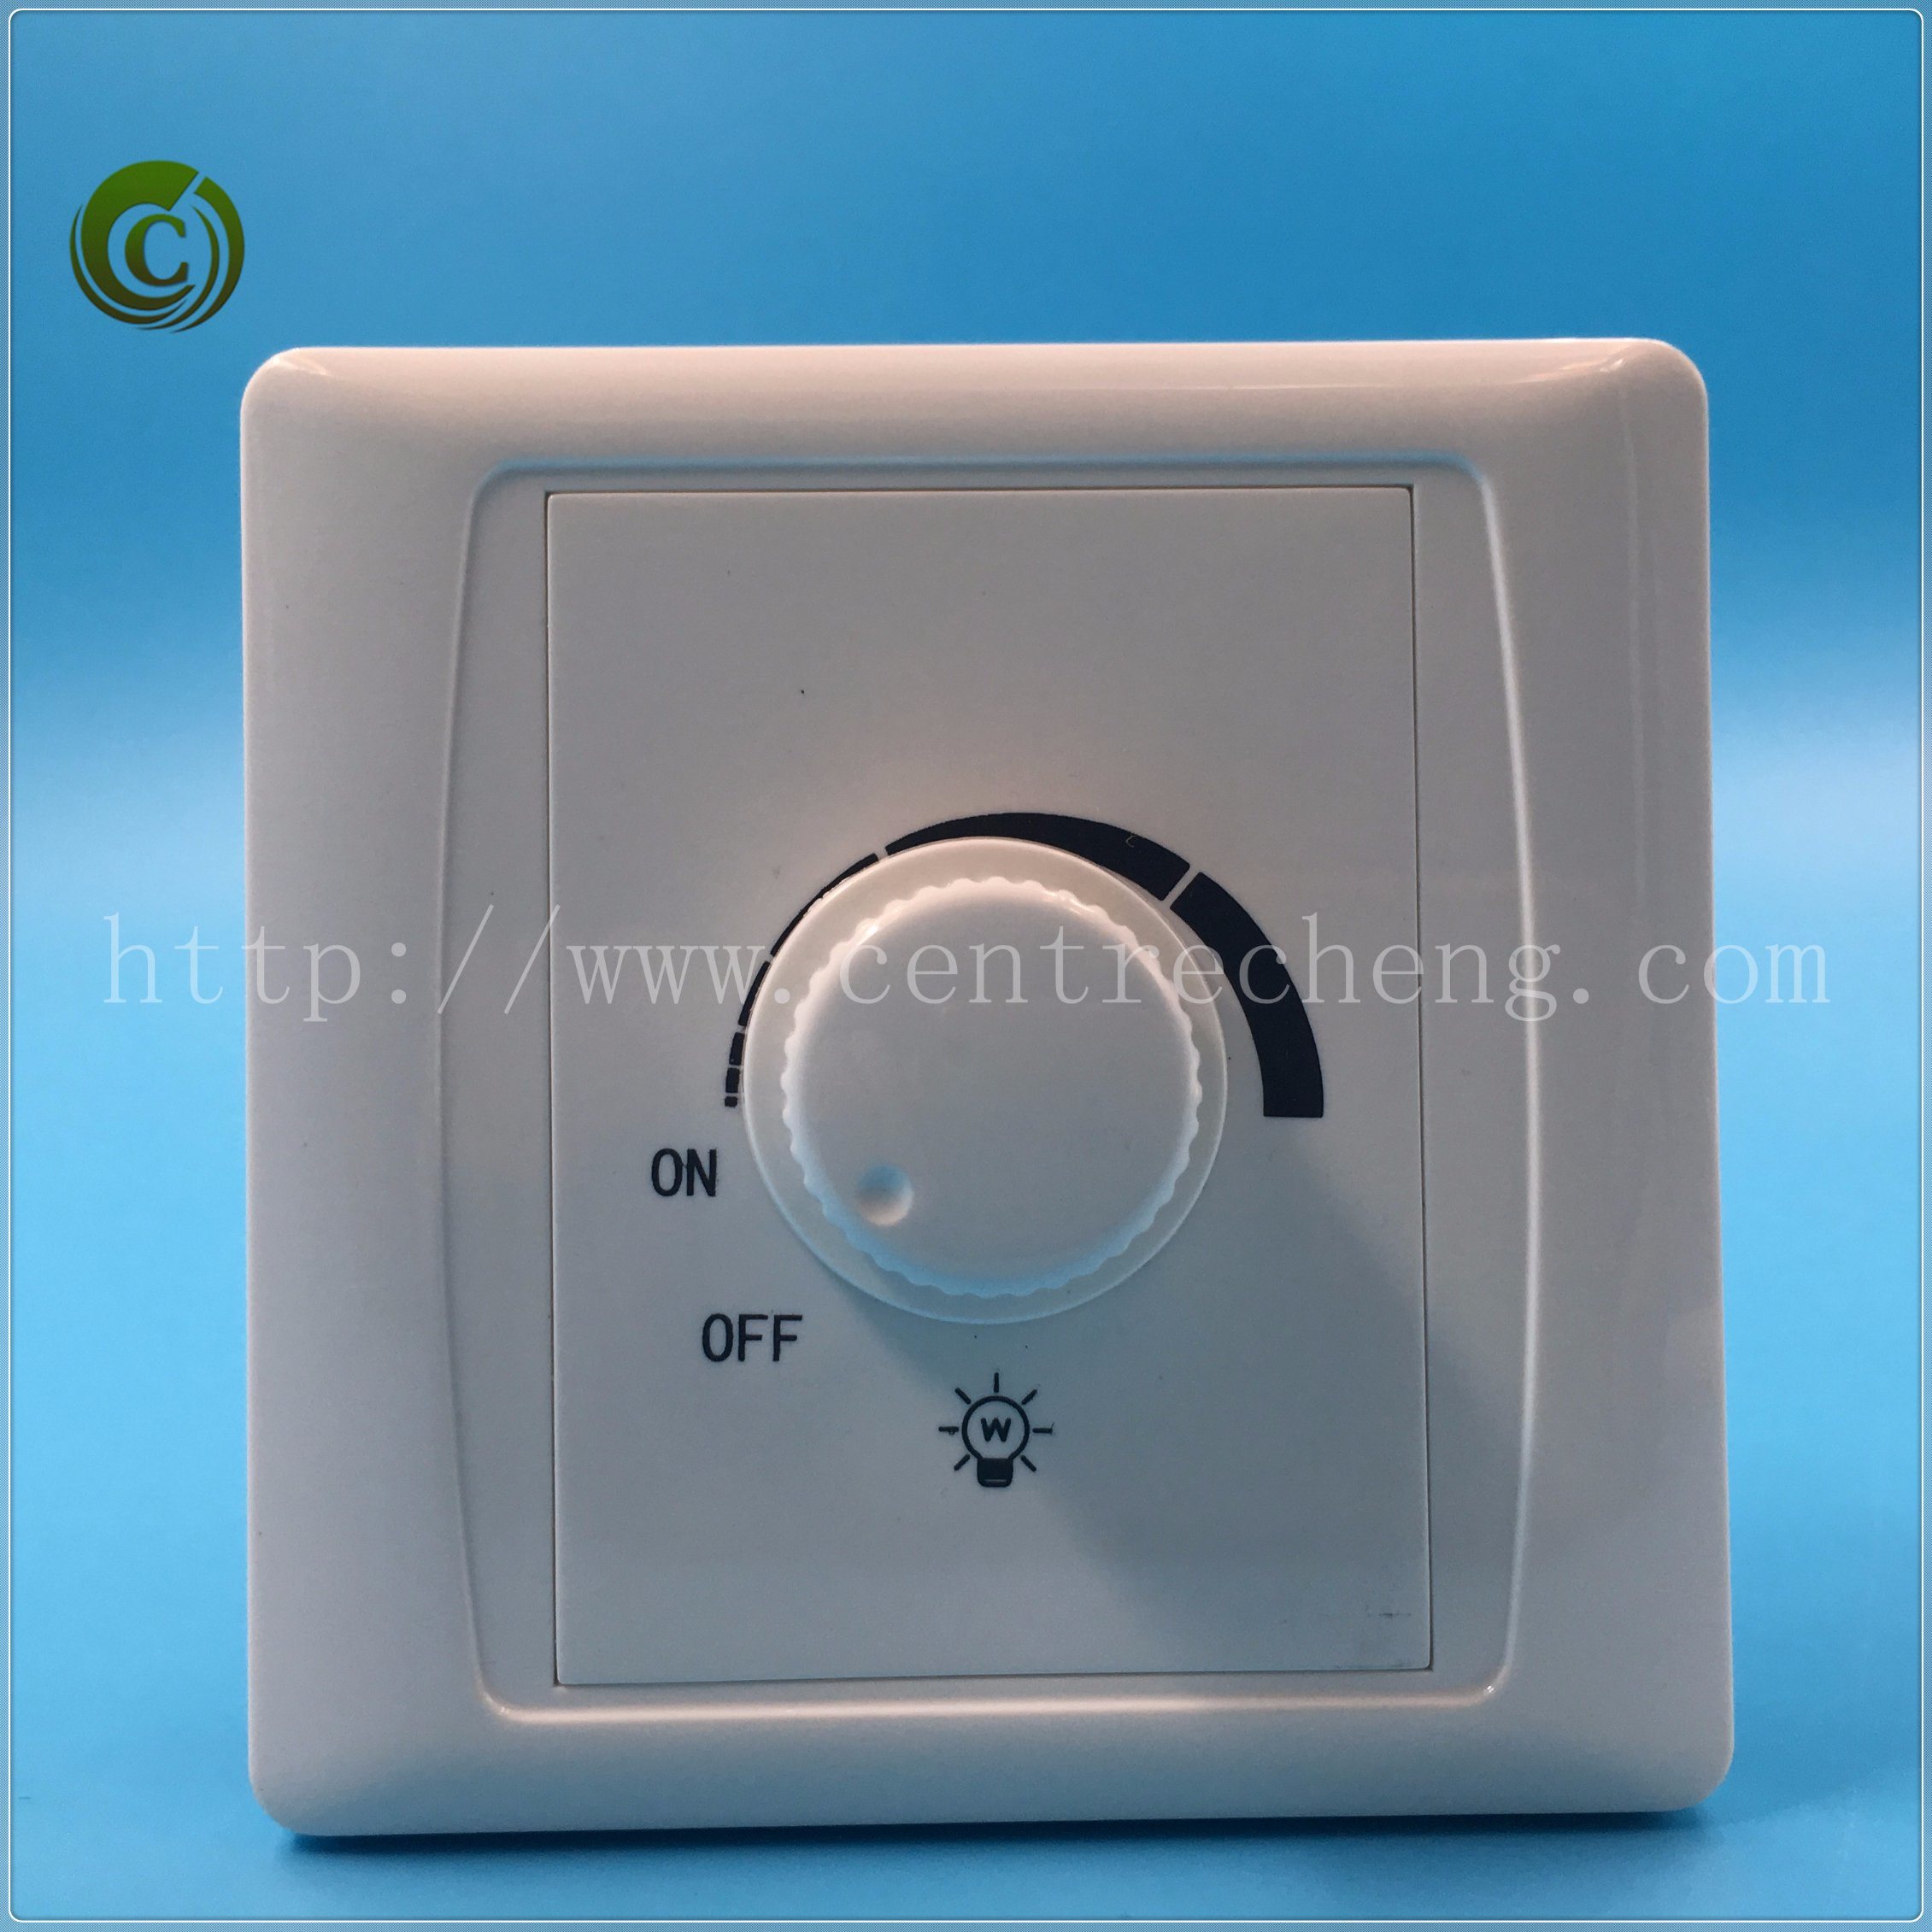 Light Dimmer Switch A8 Switch Wall Switch Light Switch Electrical Switch White Switch